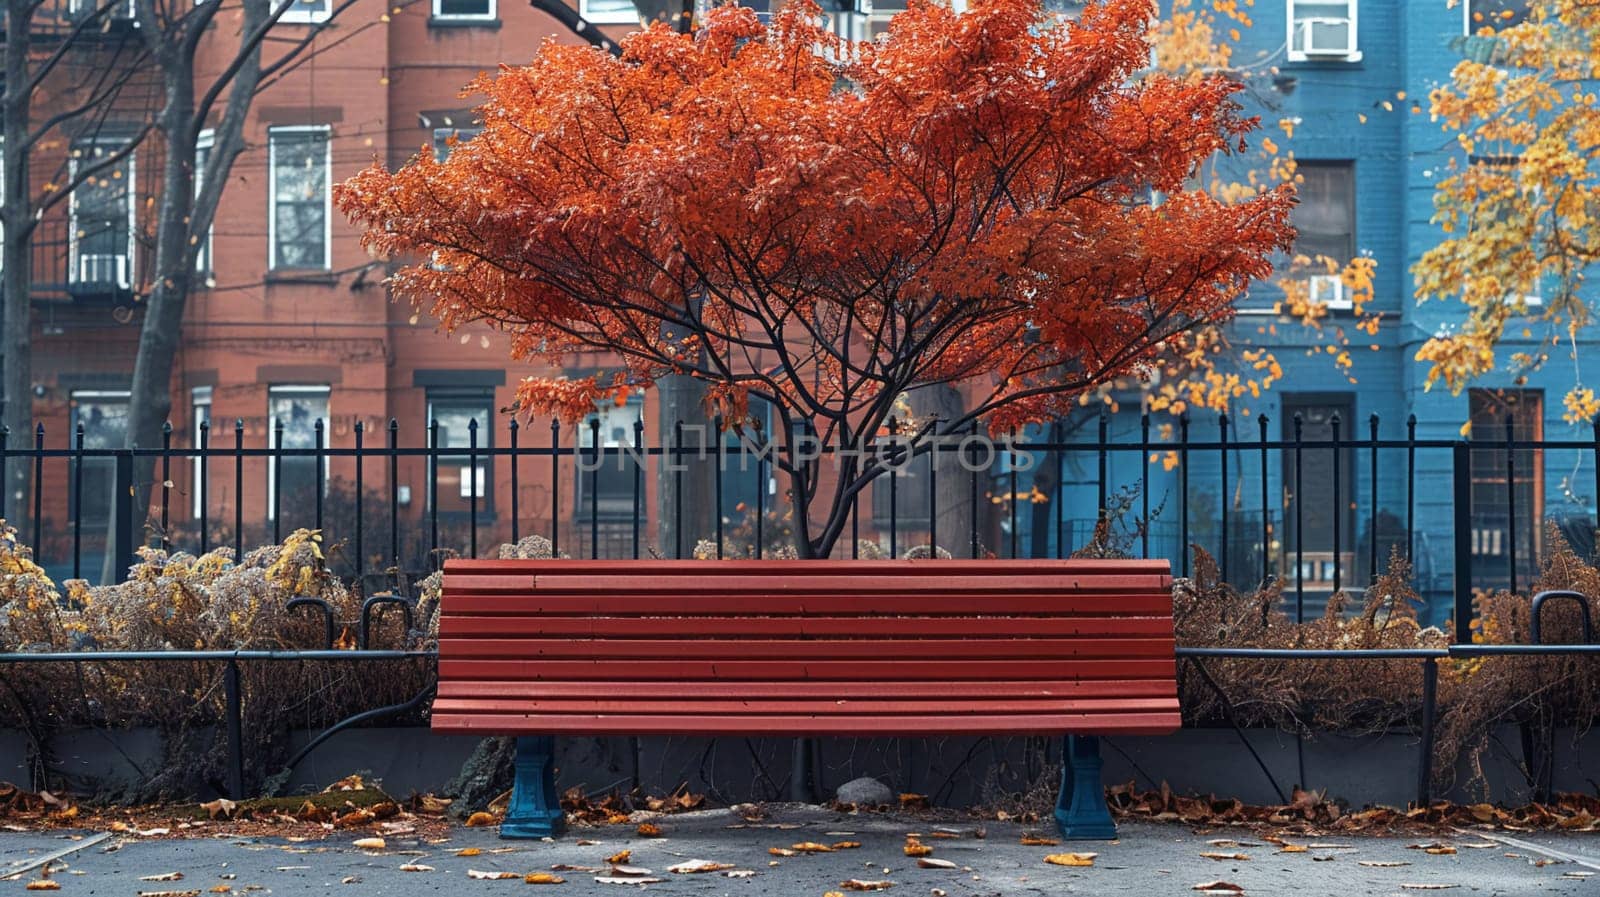 City bench moment depicted in minimalistic style, with flat colors and clean lines.